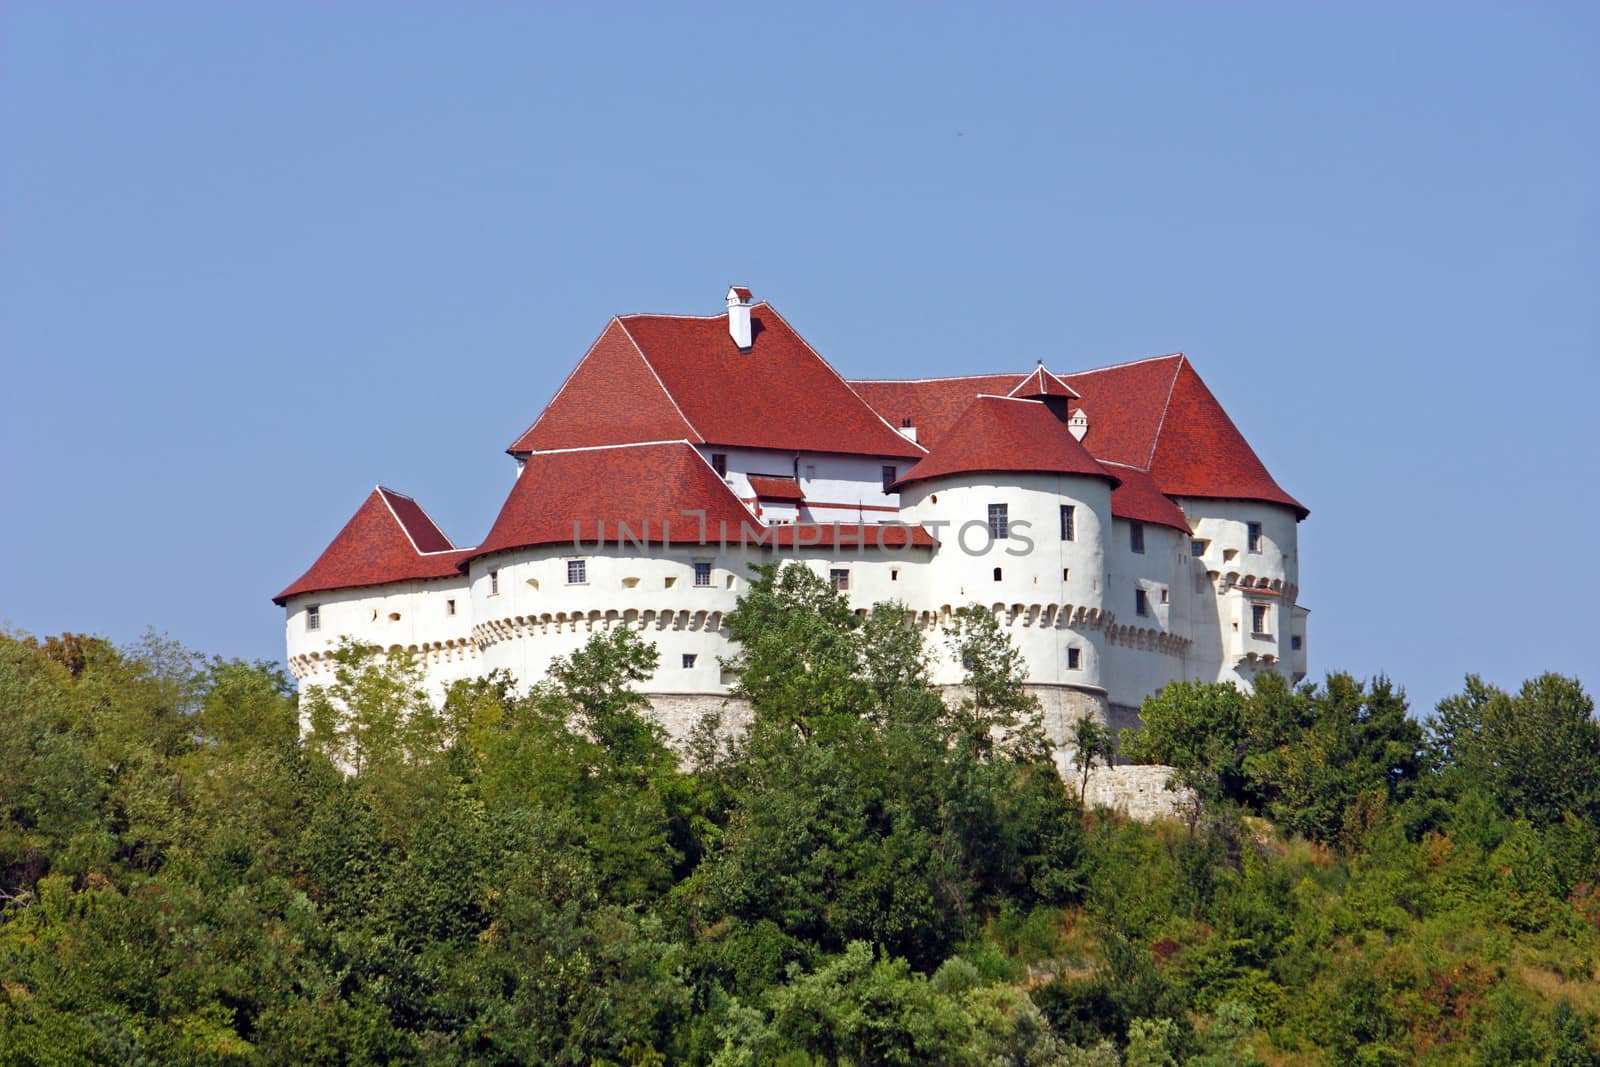 Veliki Tabor, fortress and museum in northwest Croatia, dating from the 12th century